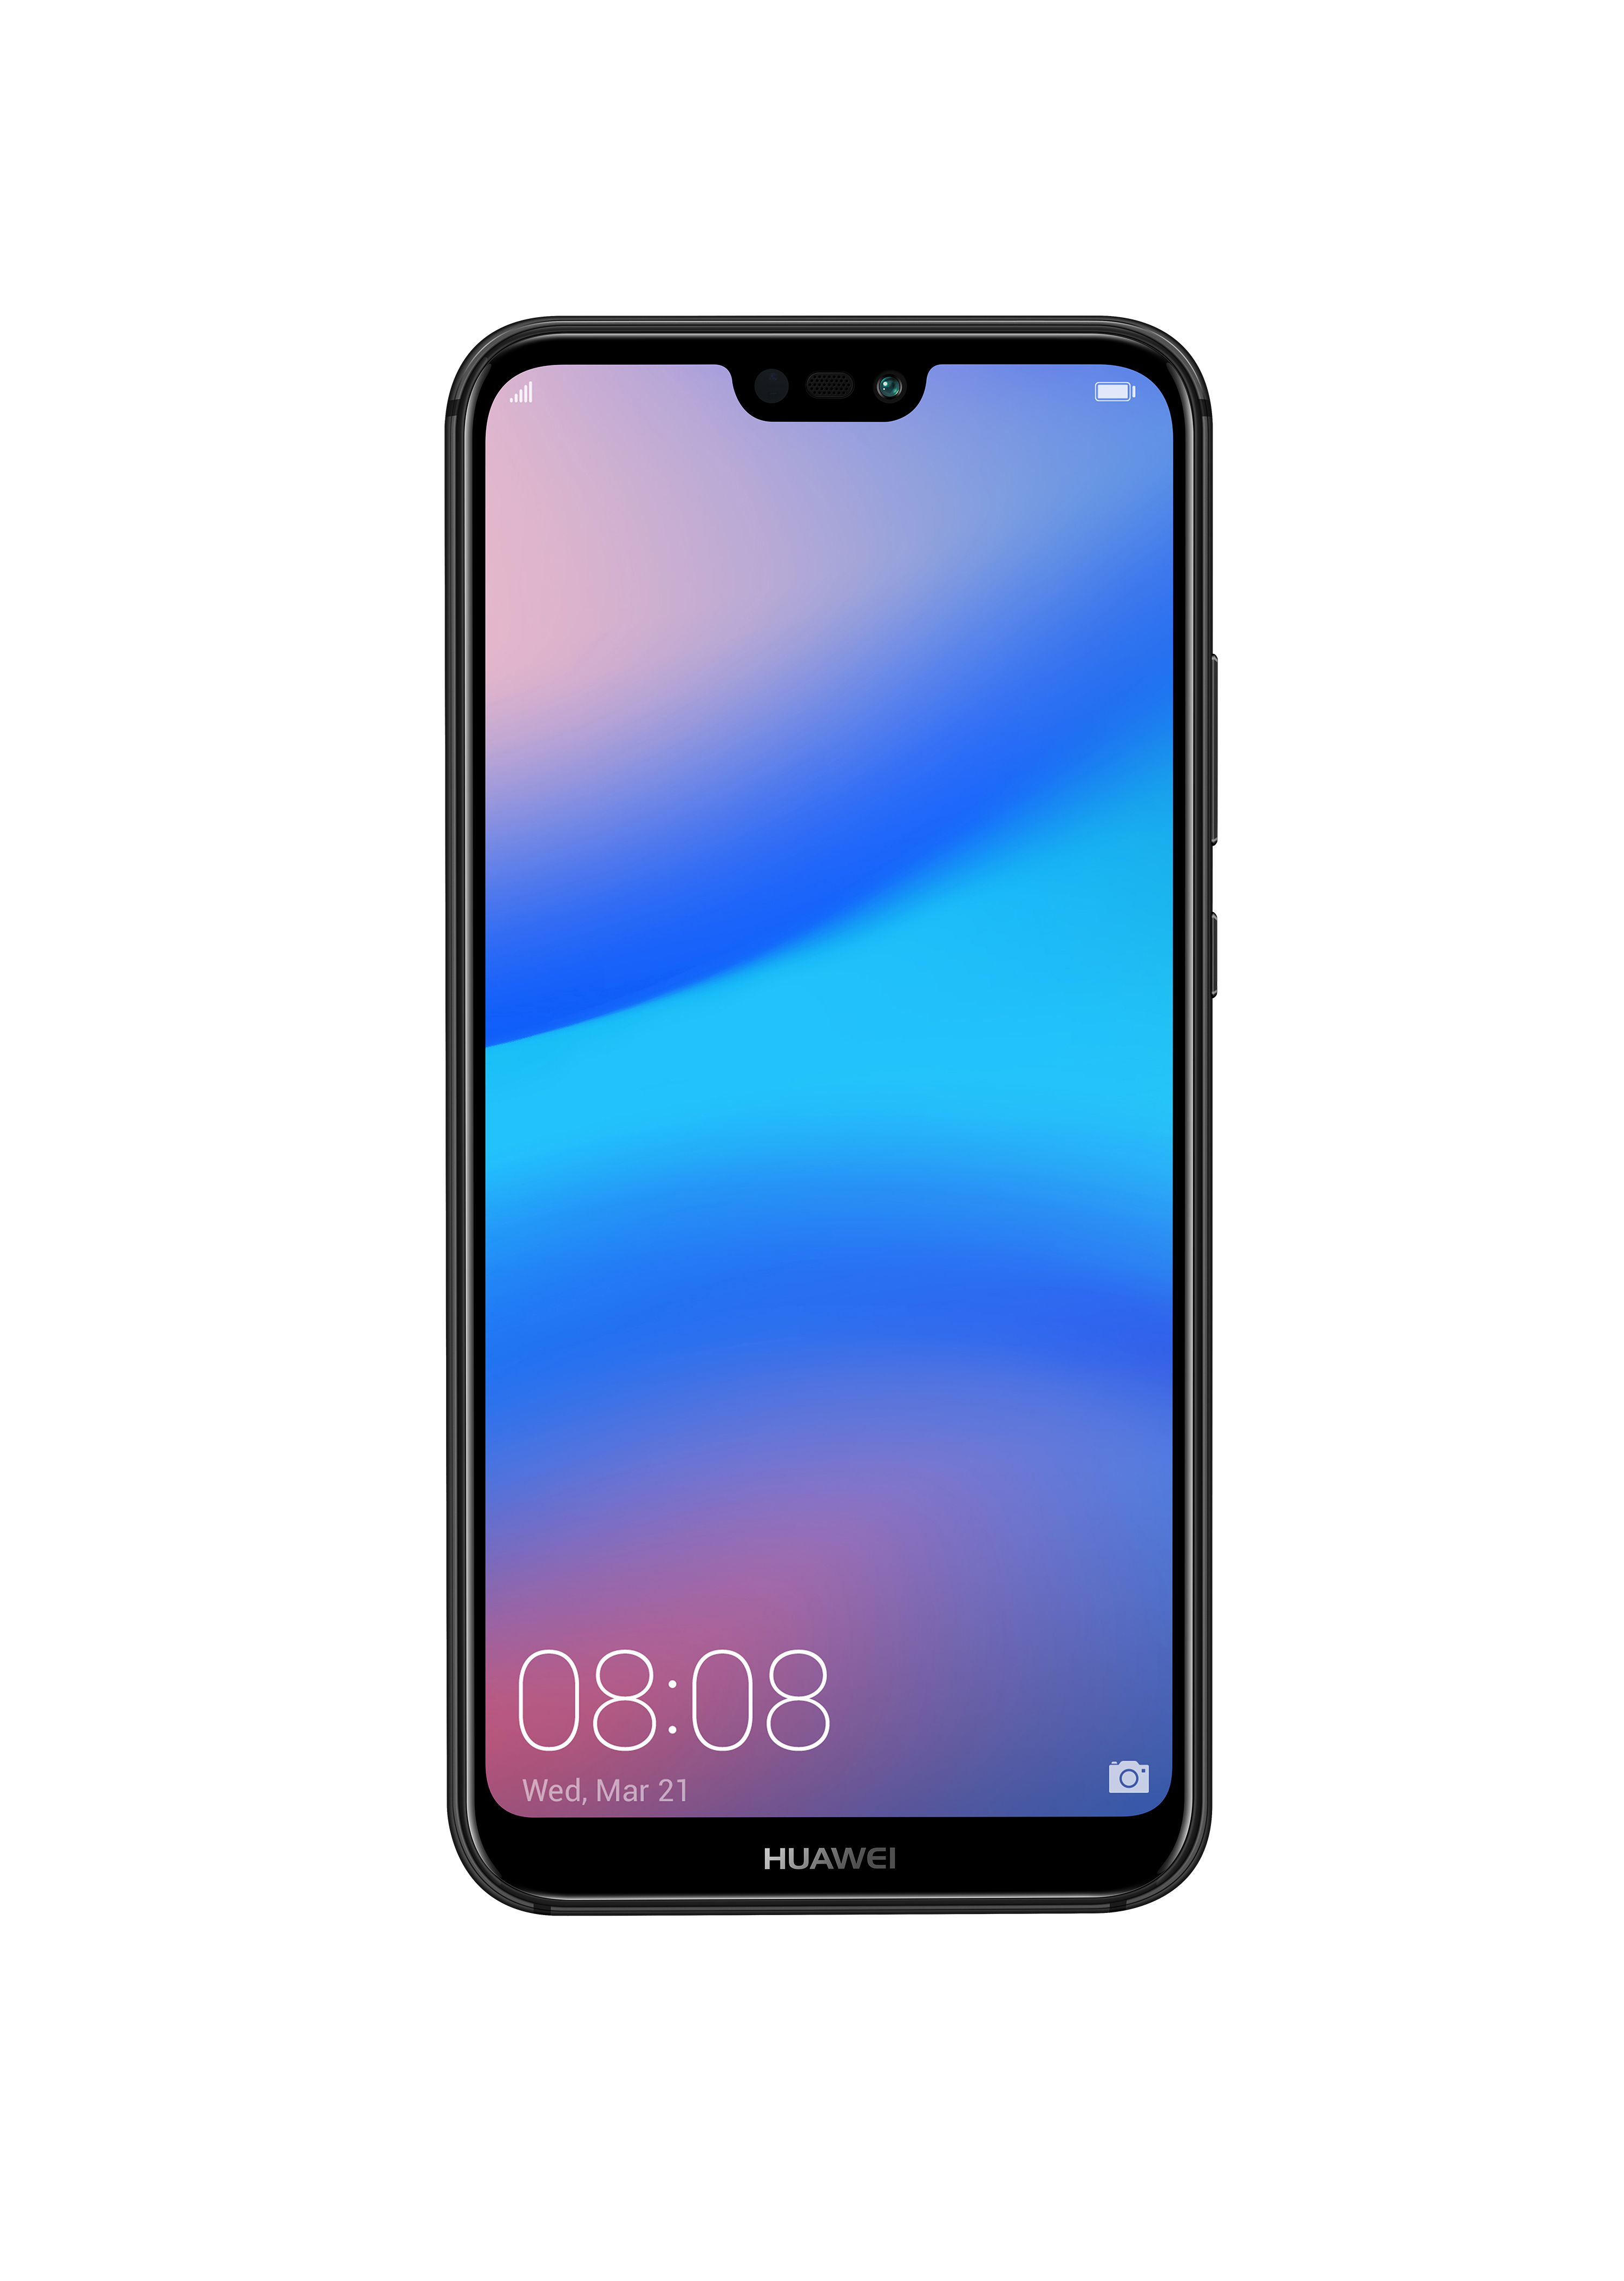 You are currently viewing HUAWEI unveils the much awaited P20 series – HUAWEI P20 Pro and HUAWEI P20 lite in India